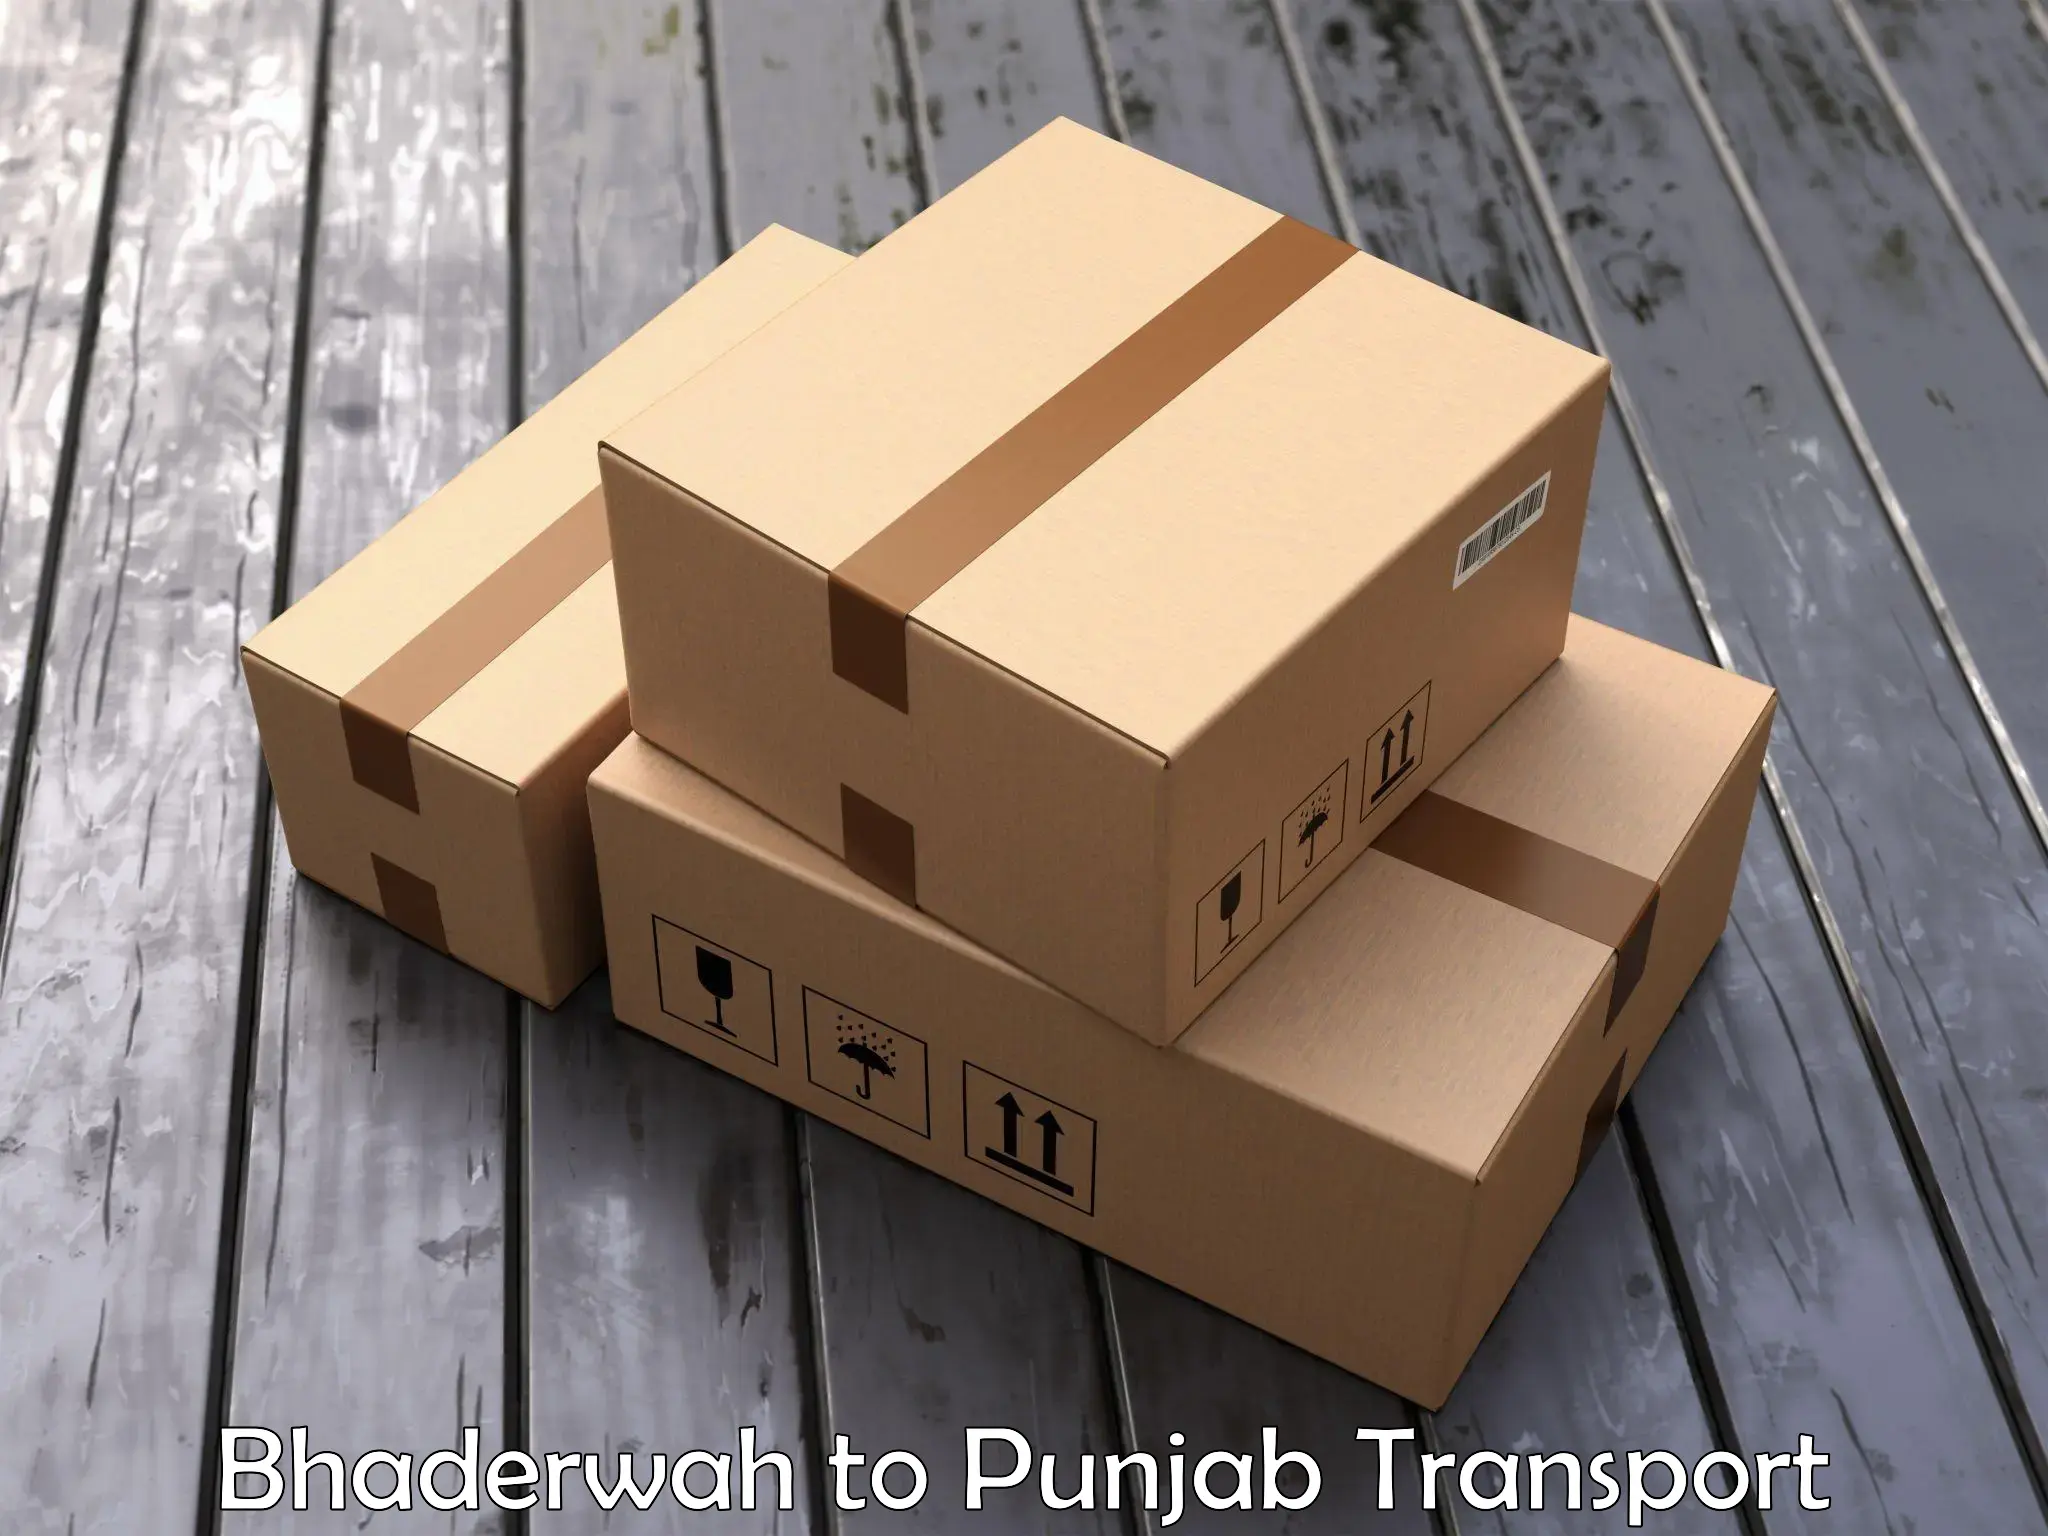 Daily parcel service transport Bhaderwah to Amritsar